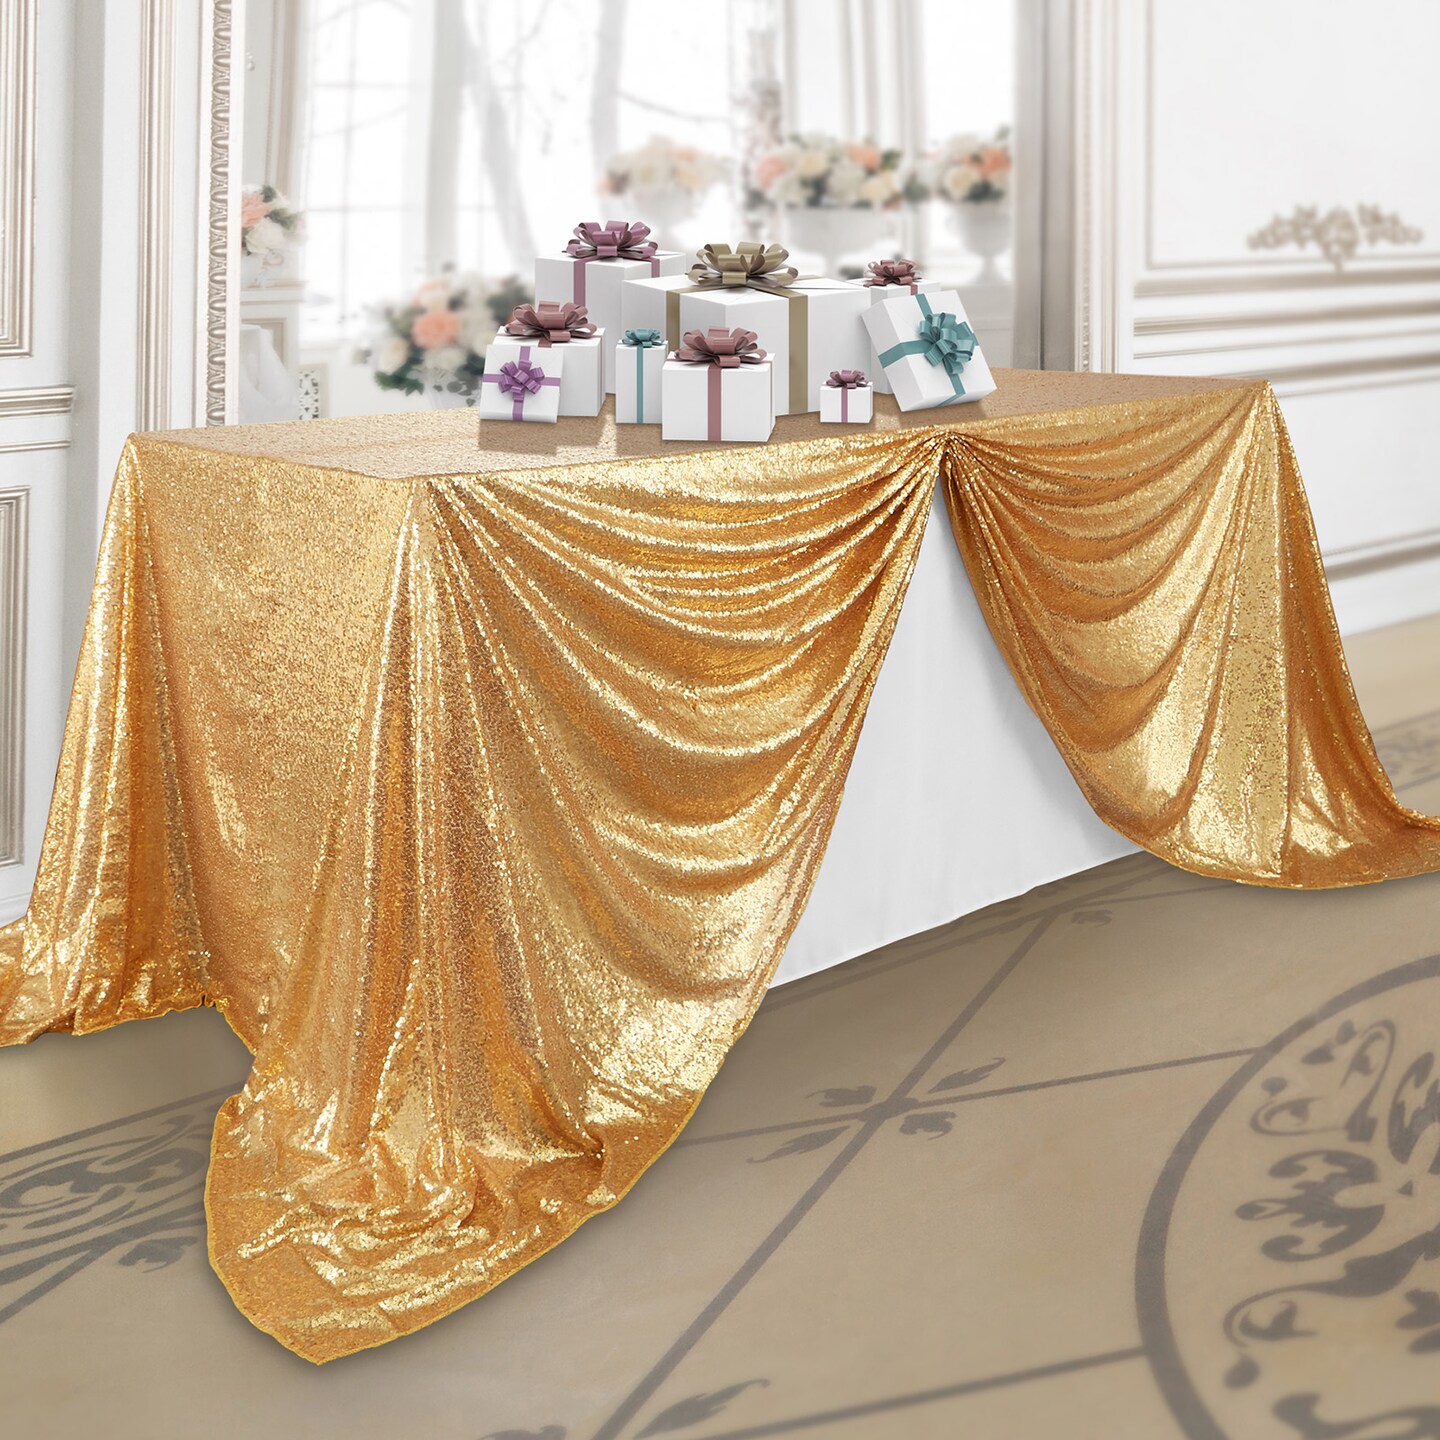 Lann's Linens Sequin Tablecloths, Overlay Covers and Table Runners